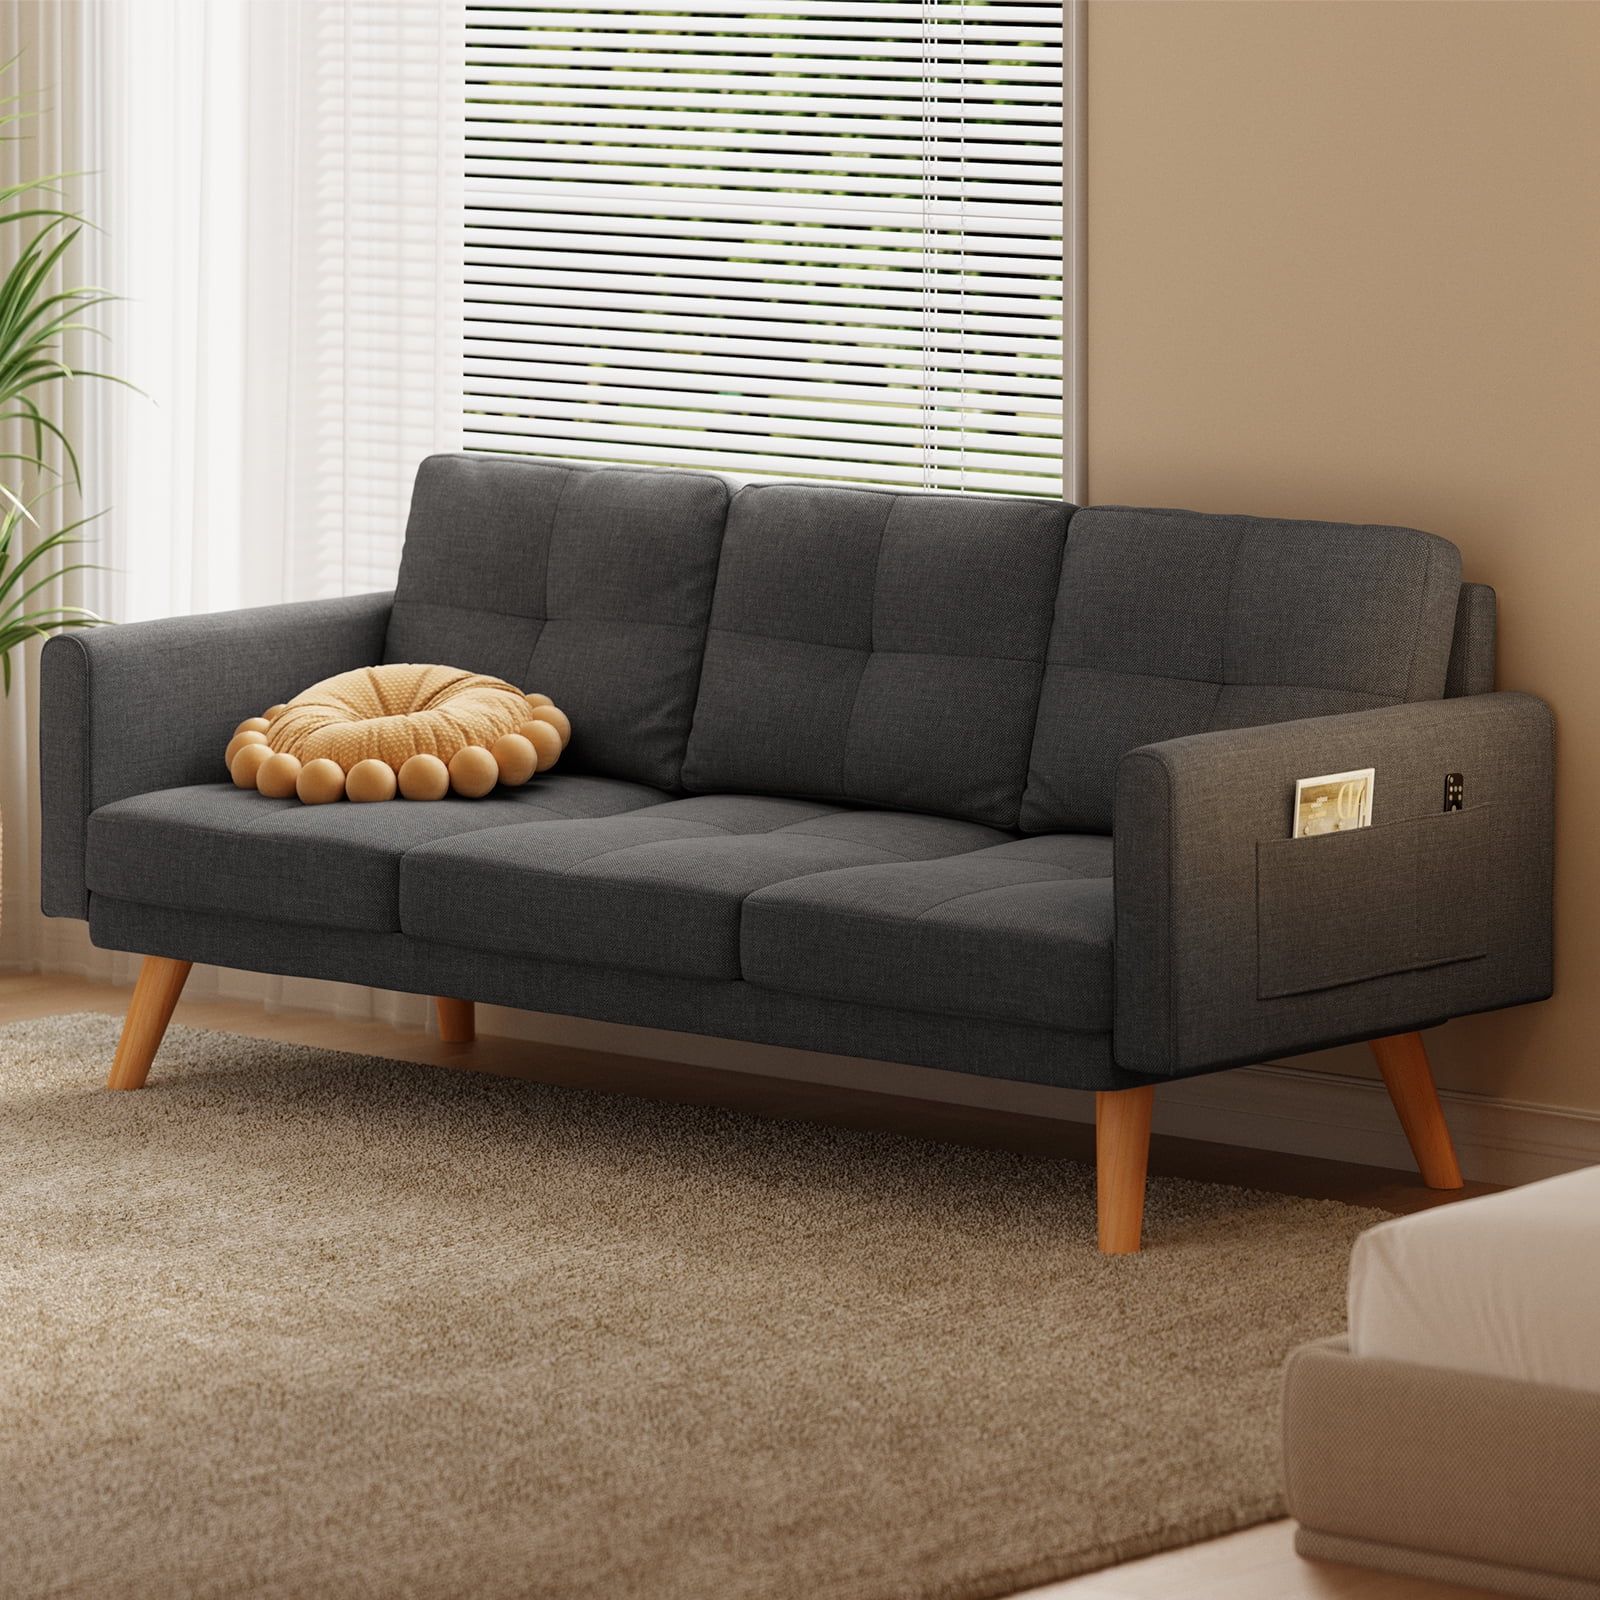 Lofka Futon Sofa Bed, Modern Sofa and Upholstered Couch with Curved Arm, Dark Gray | Walmart (US)